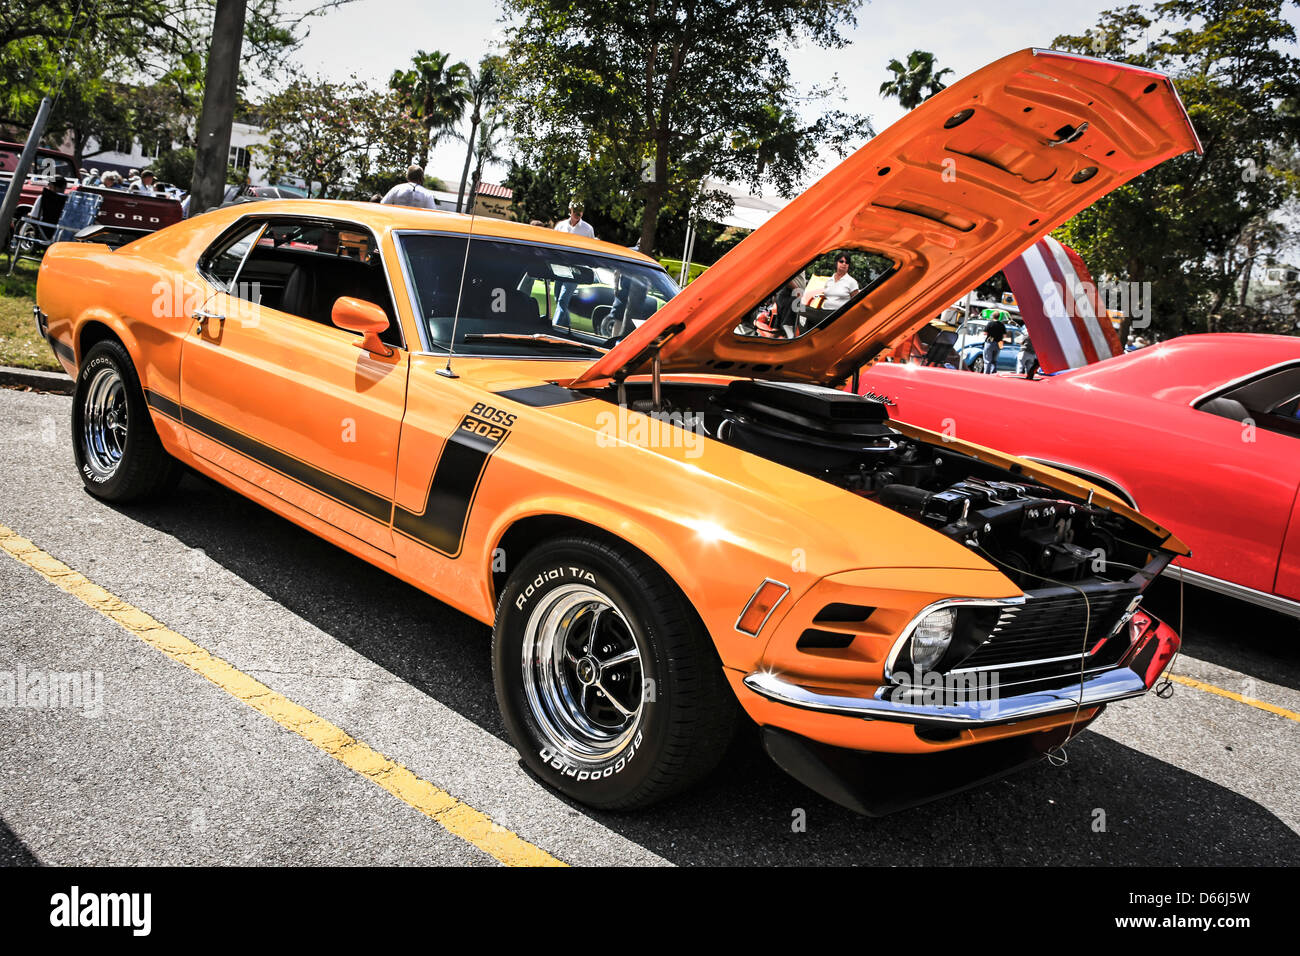 1974 Ford Mustang Boss 302 Muscle Car Stock Photo - Alamy